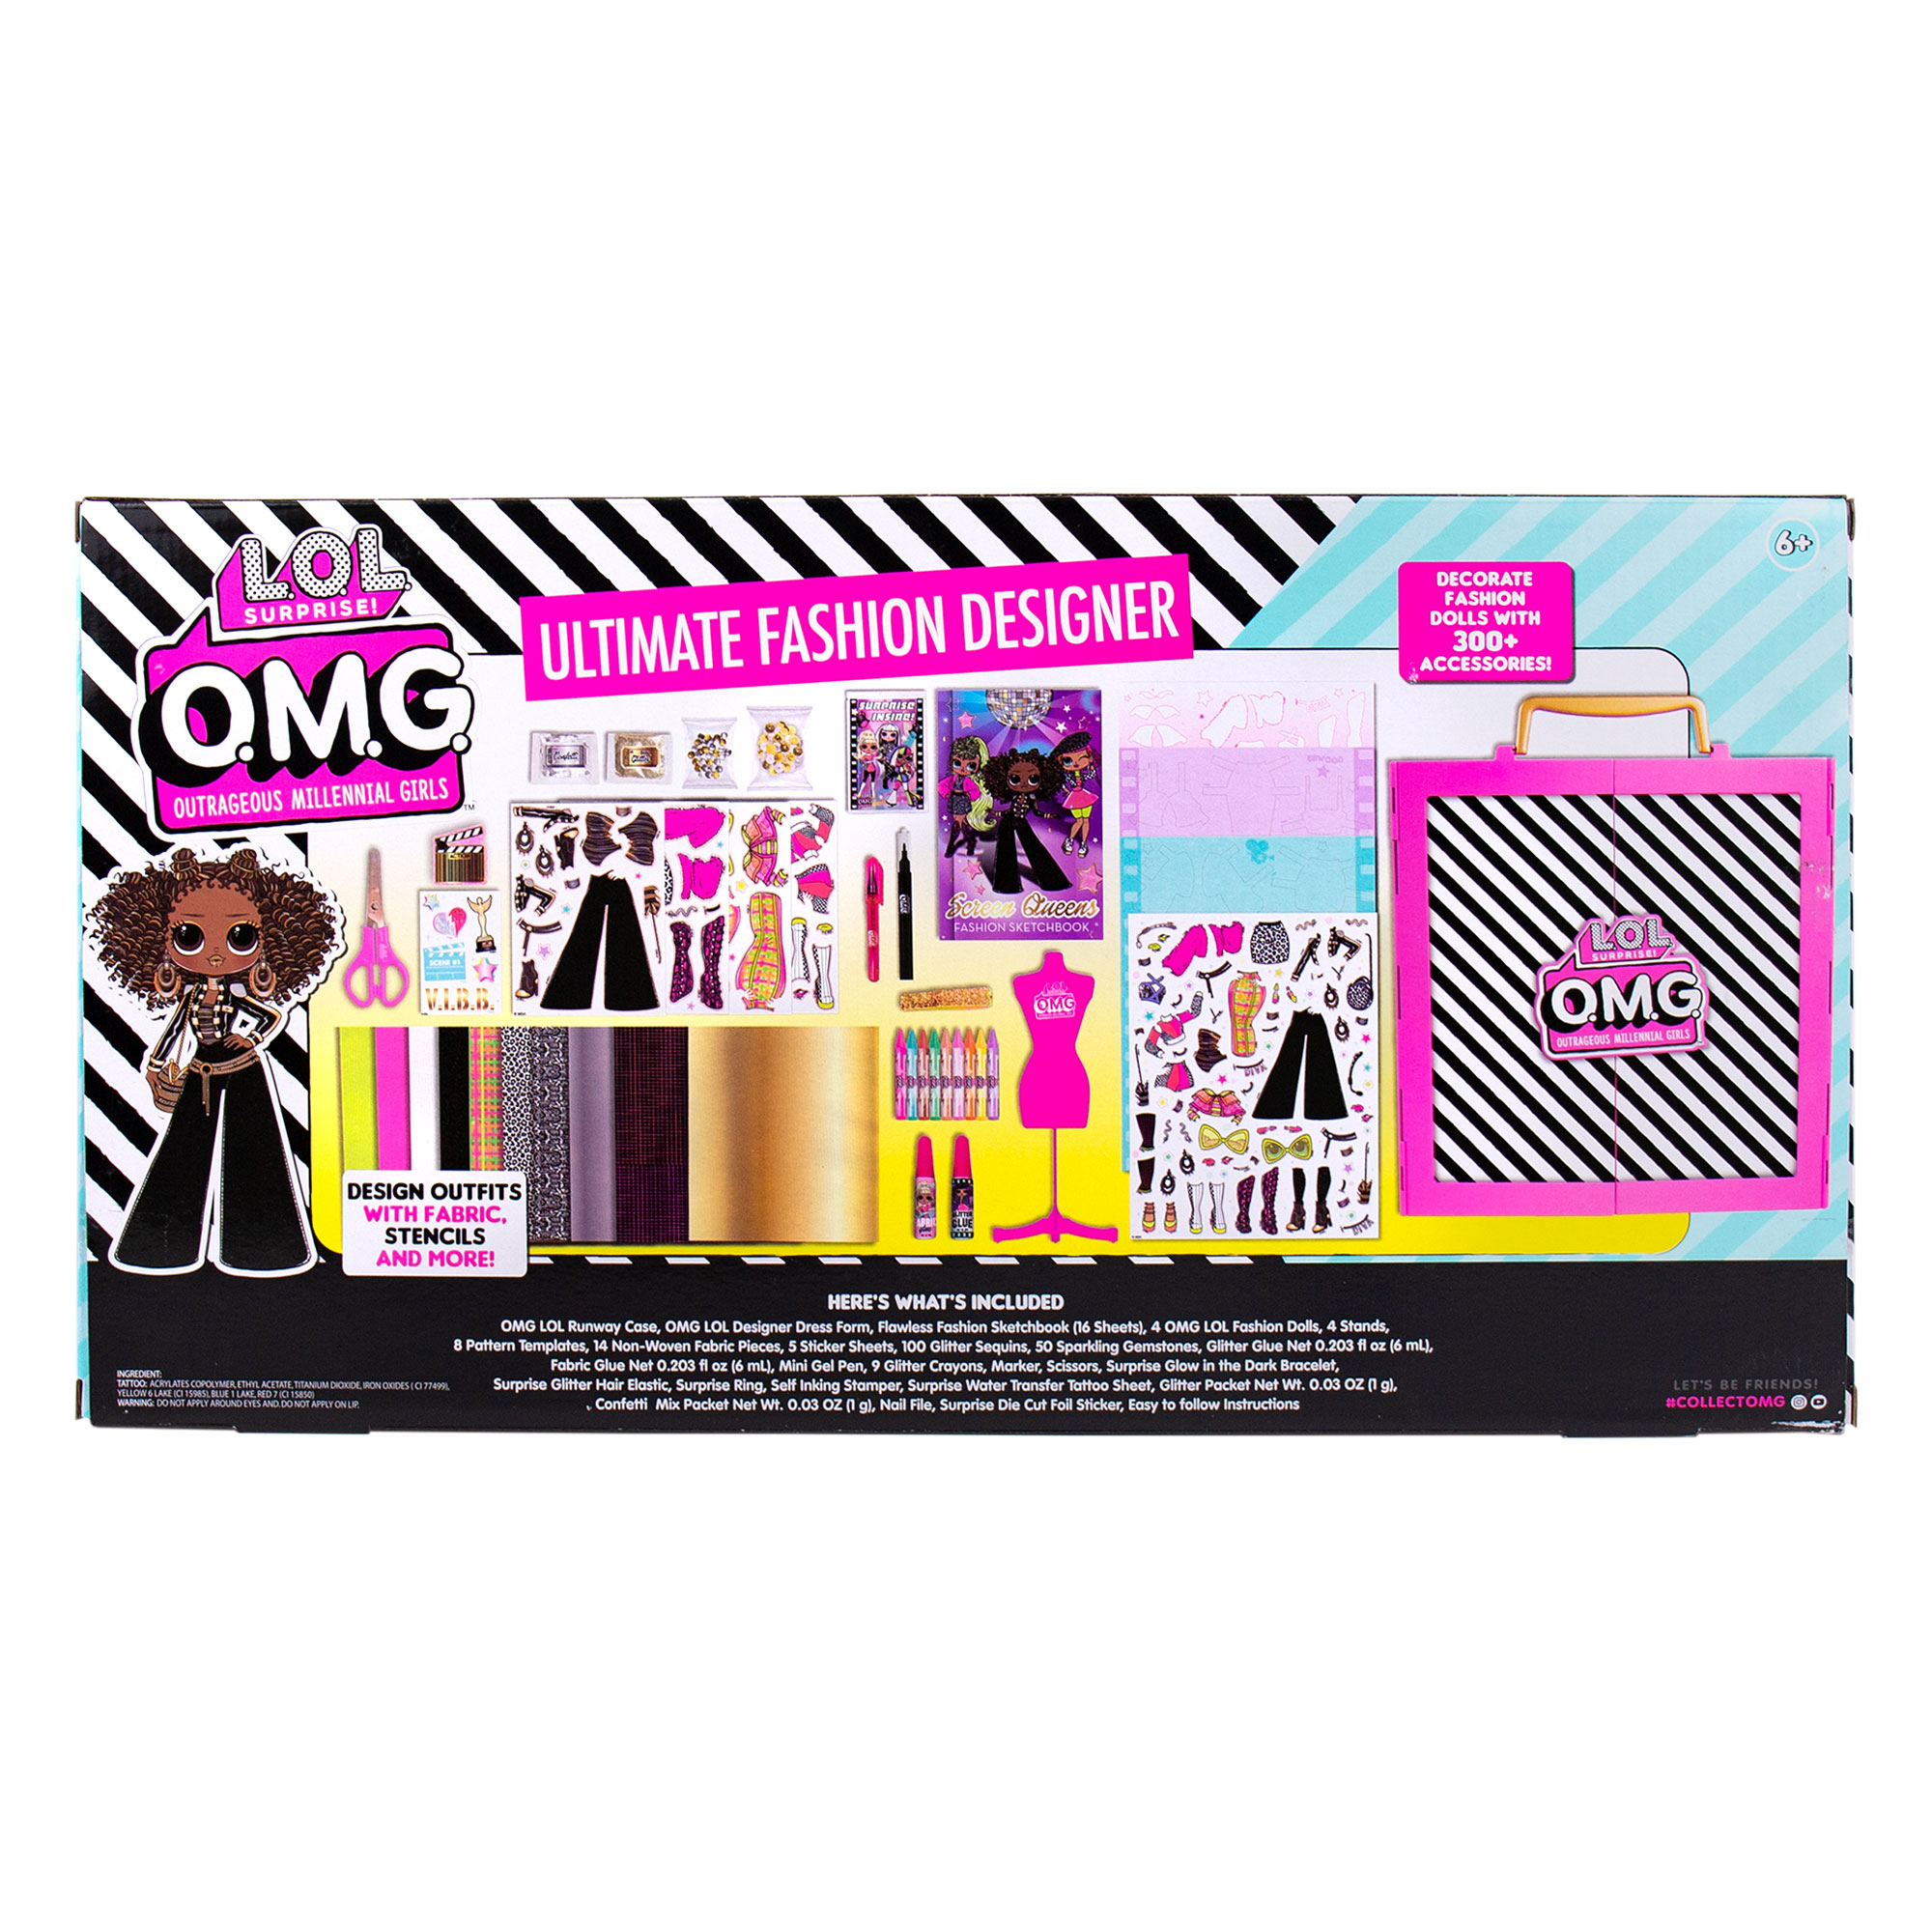 L.O.L. Surprise! O.M.G. Ultimate Fashion Designer, Double Feature Series, Decorate 4 Die-Cut Dolls With 300+ Accessories, 5 Surprises Inside, Includes Reusable Runway Case - image 5 of 5